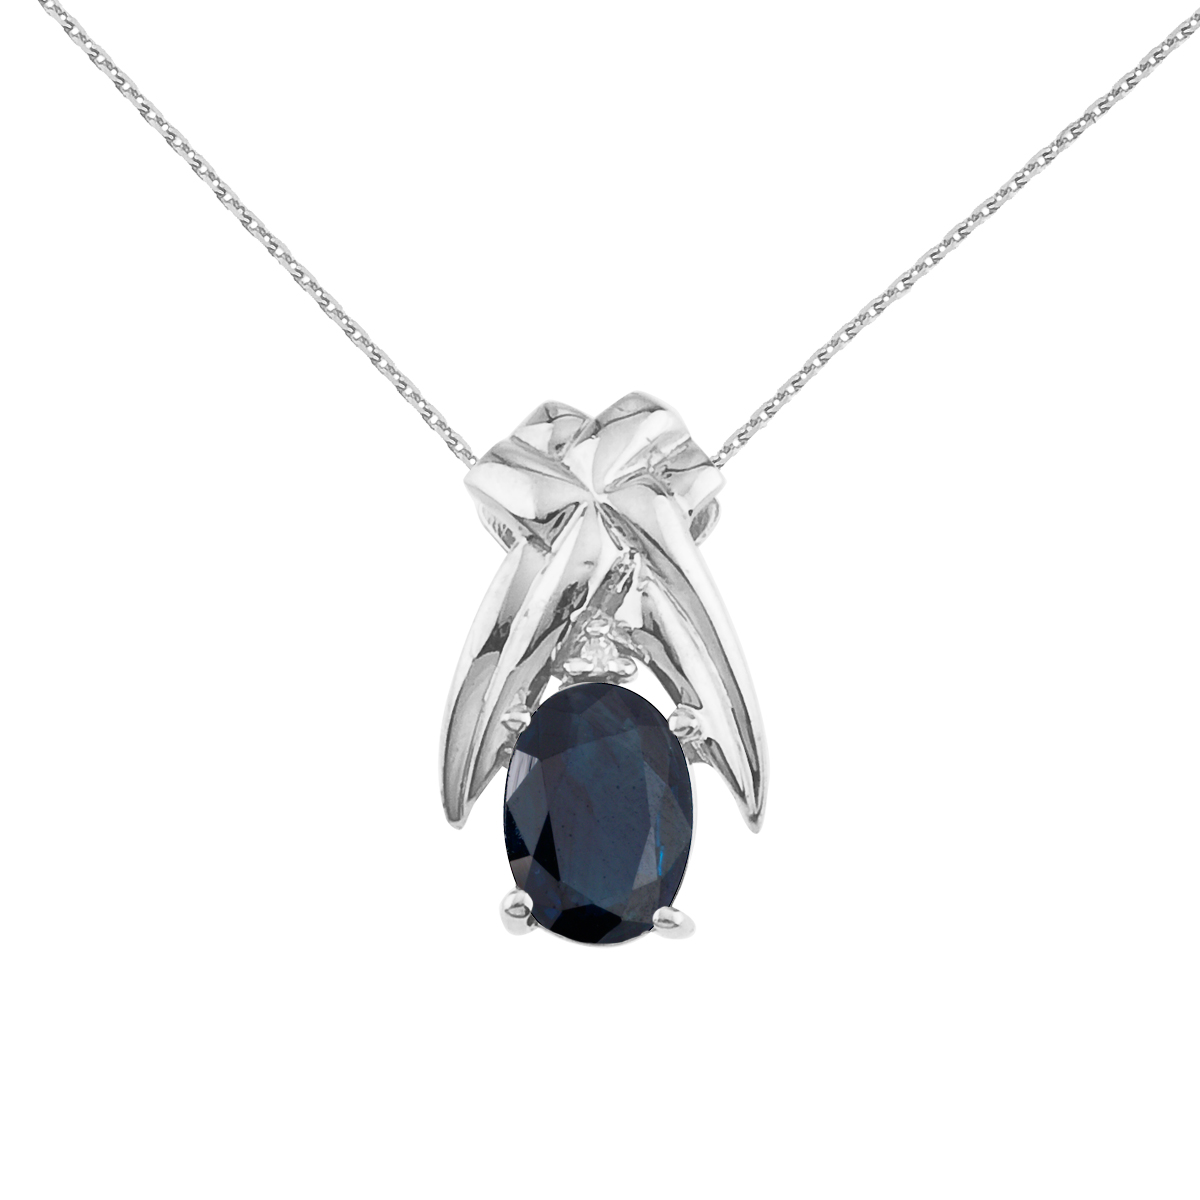 7x5 mm natural sapphire and diamond accented pendant in 14k yellow gold.